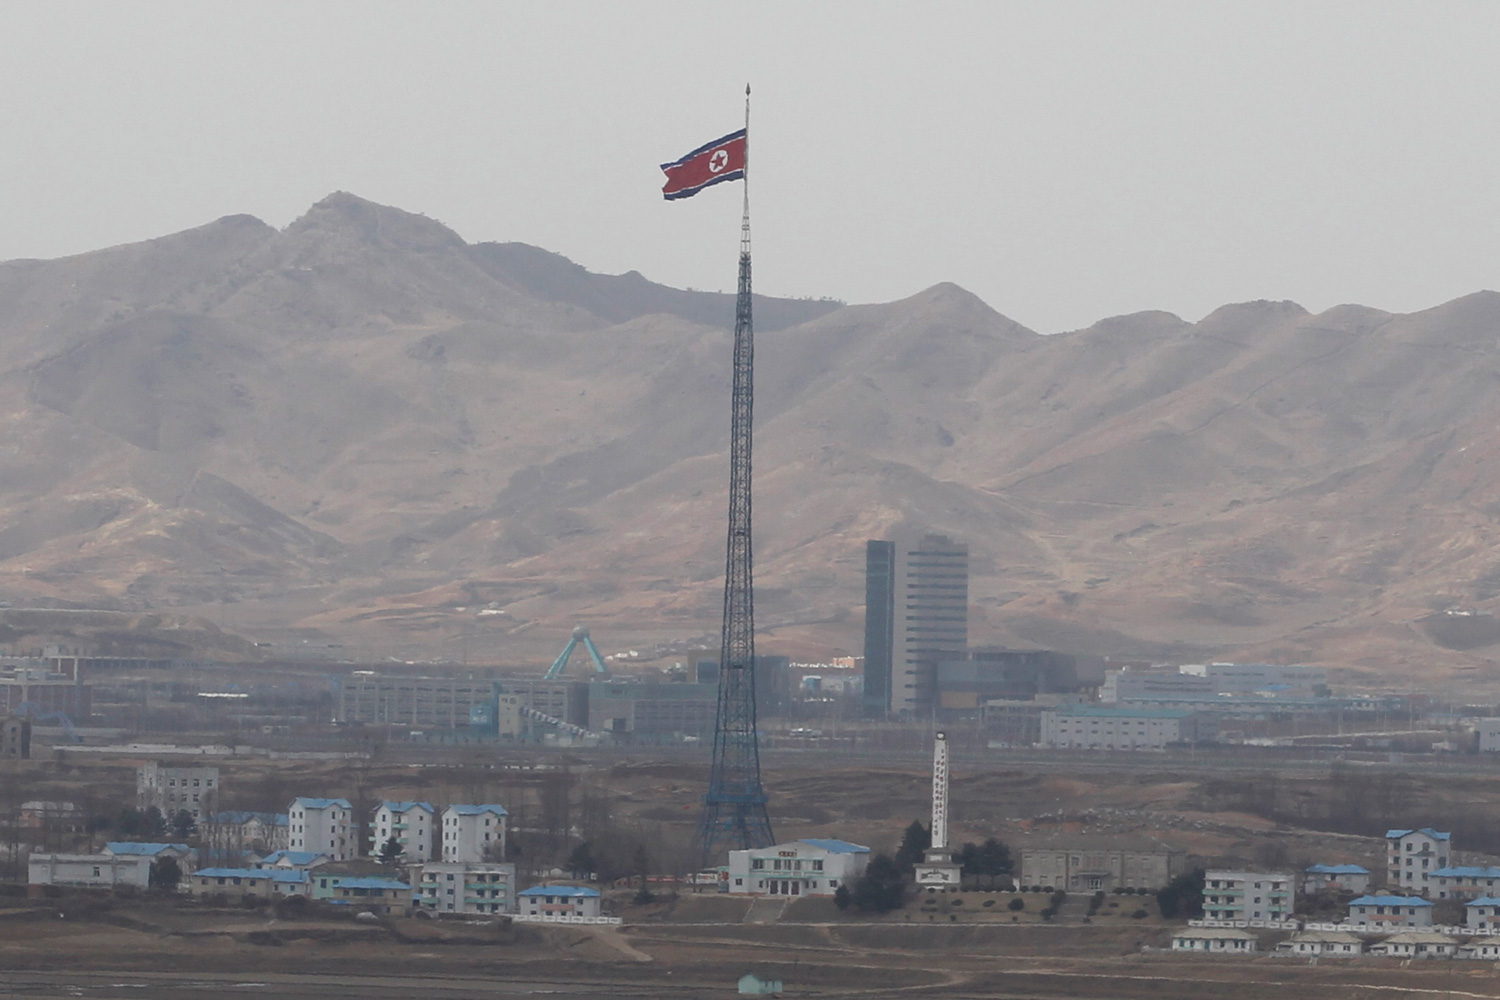 March 25, 2012. A North Korean flag is hung at half-mast at the propaganda village of Gijungdong in this photo taken from Observation Post Ouellette after U.S. President Barack Obama's visit to the truce village of Panmunjom in the demilitarised zone (DMZ) separating the two Koreas, north of Seoul.